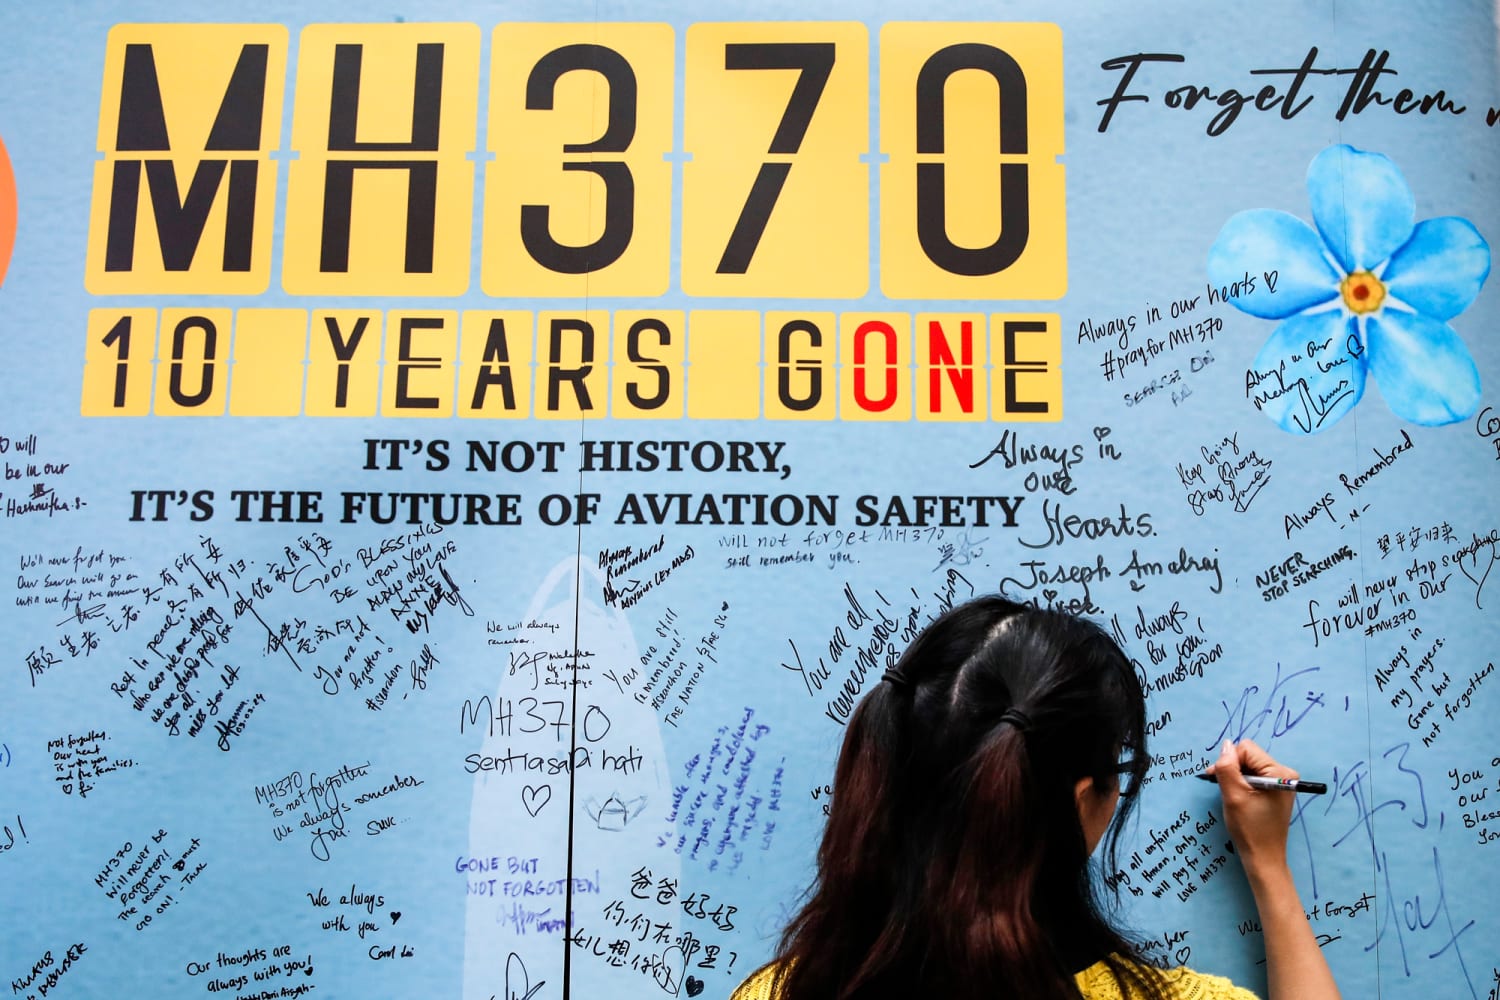 Malaysia may renew the search for missing aircraft MH370, 10 years after its disappearance